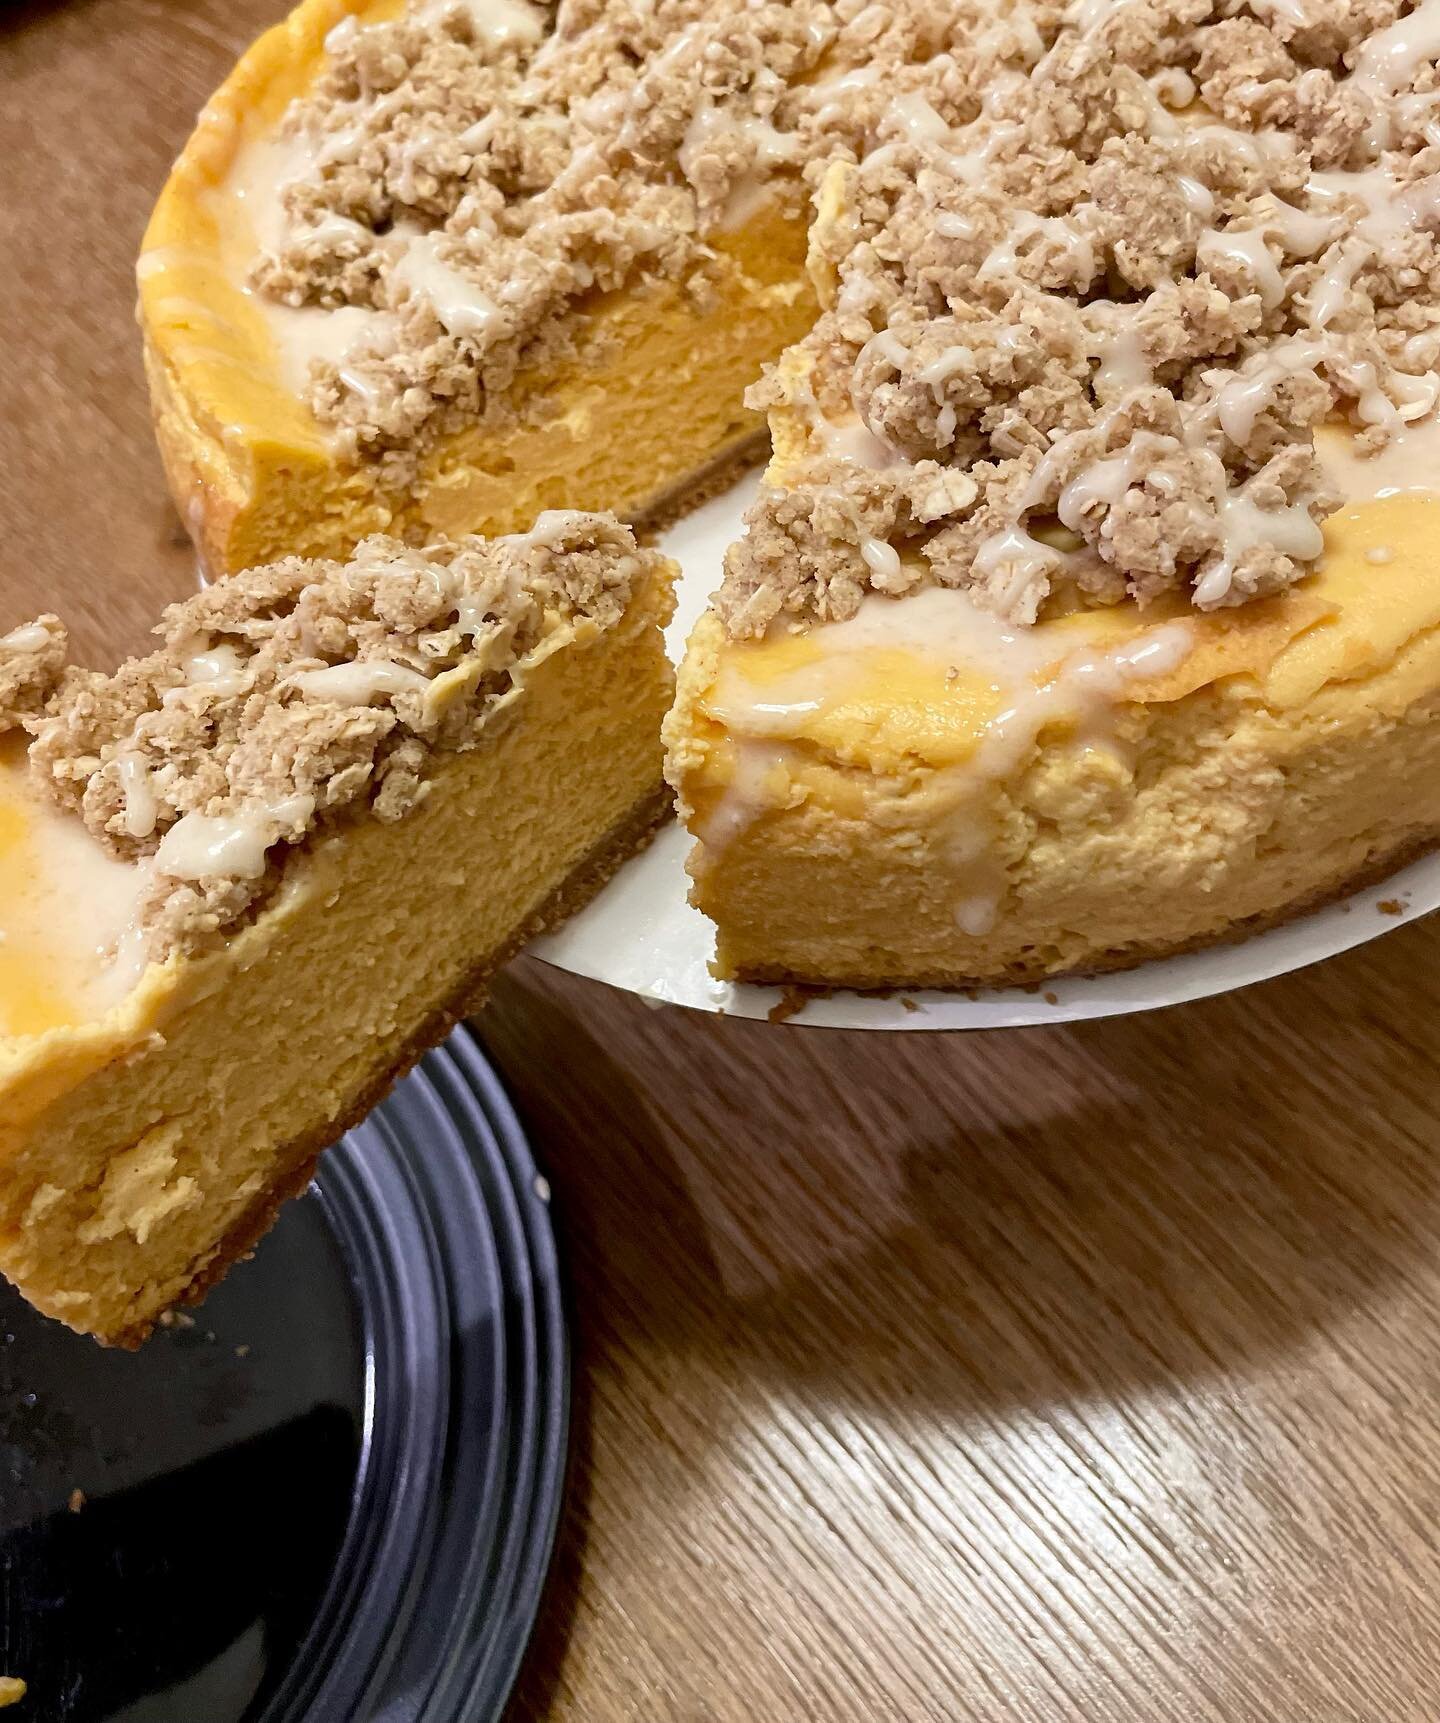 Sweet Potato Cheesecake topped with an oatmeal crumble and cinnamon glaze. This idea came to me in a vision and tasted like a dream, message me for yours today!

Check our website out at topknotartisanbakery.com

#tkab #topknot #homebakery #delicious